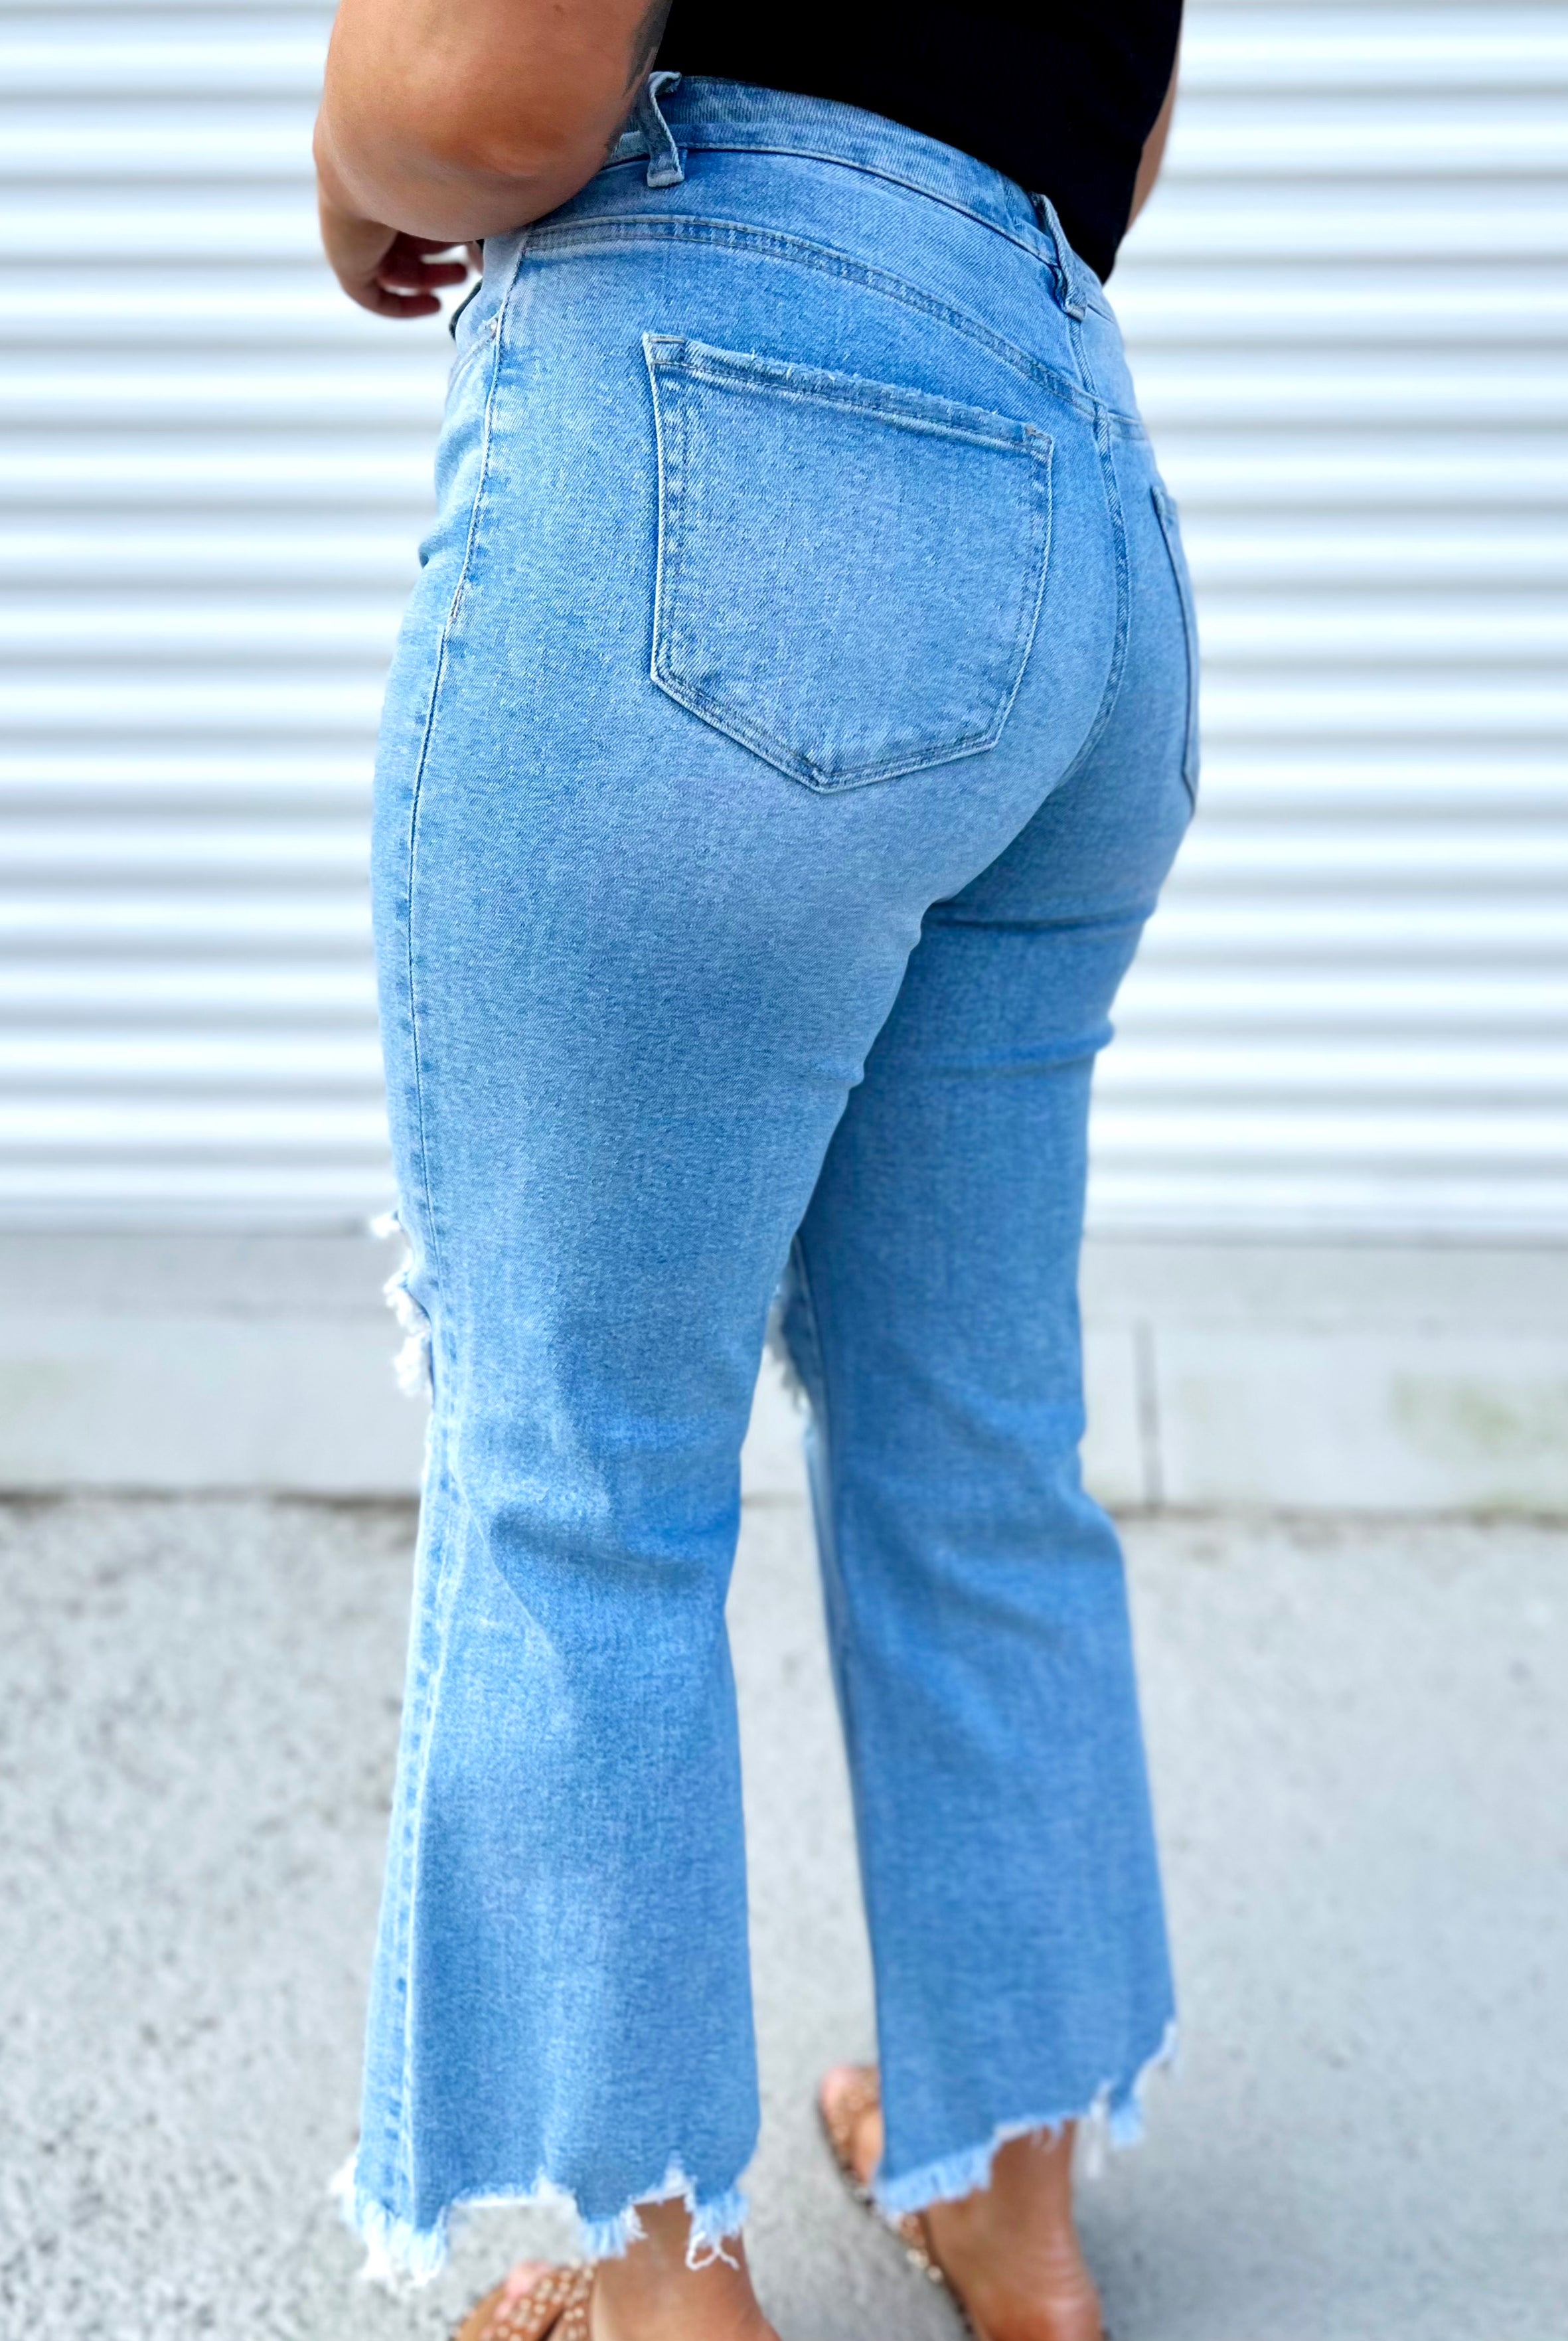 Flash Back Vintage Crop Flare Jeans by Mica-190 Jeans-Mica Denim-Heathered Boho Boutique, Women's Fashion and Accessories in Palmetto, FL